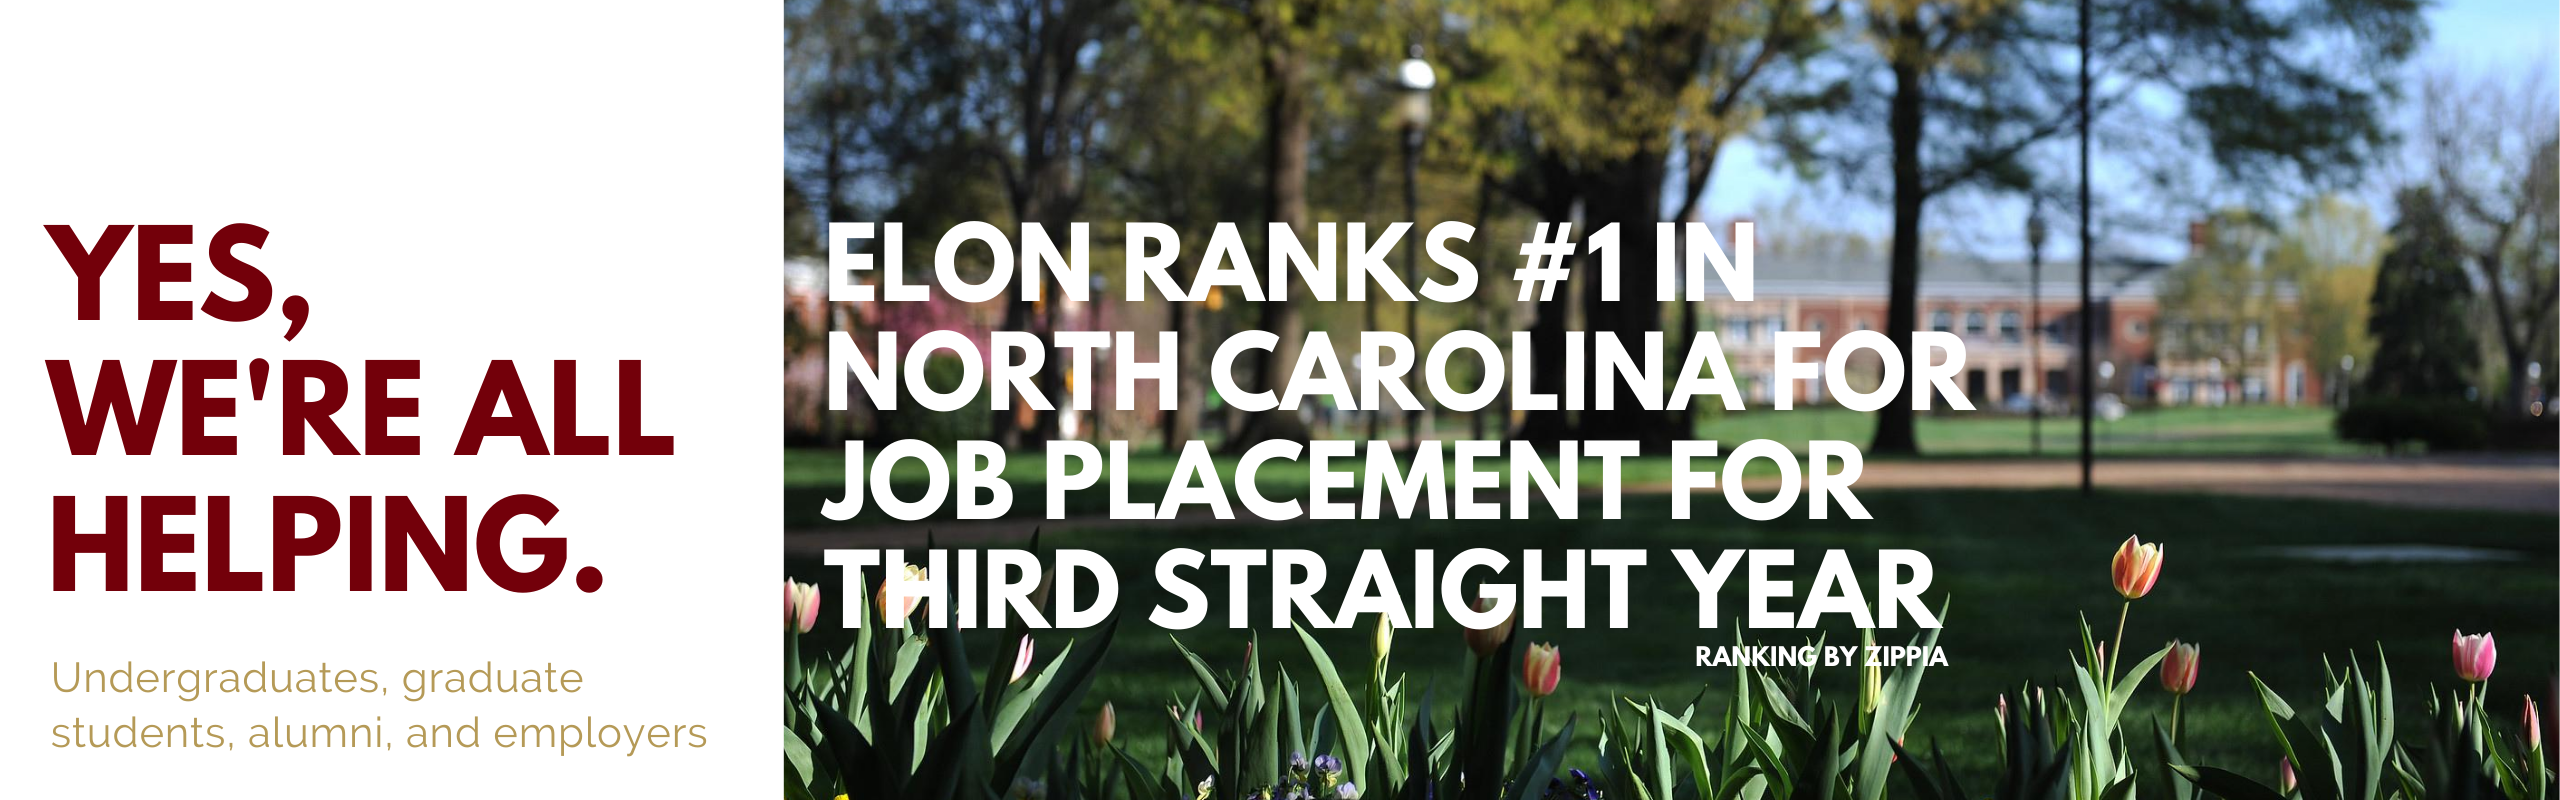 Elon ranks #1 in North Carolina for job placement for third straight year -